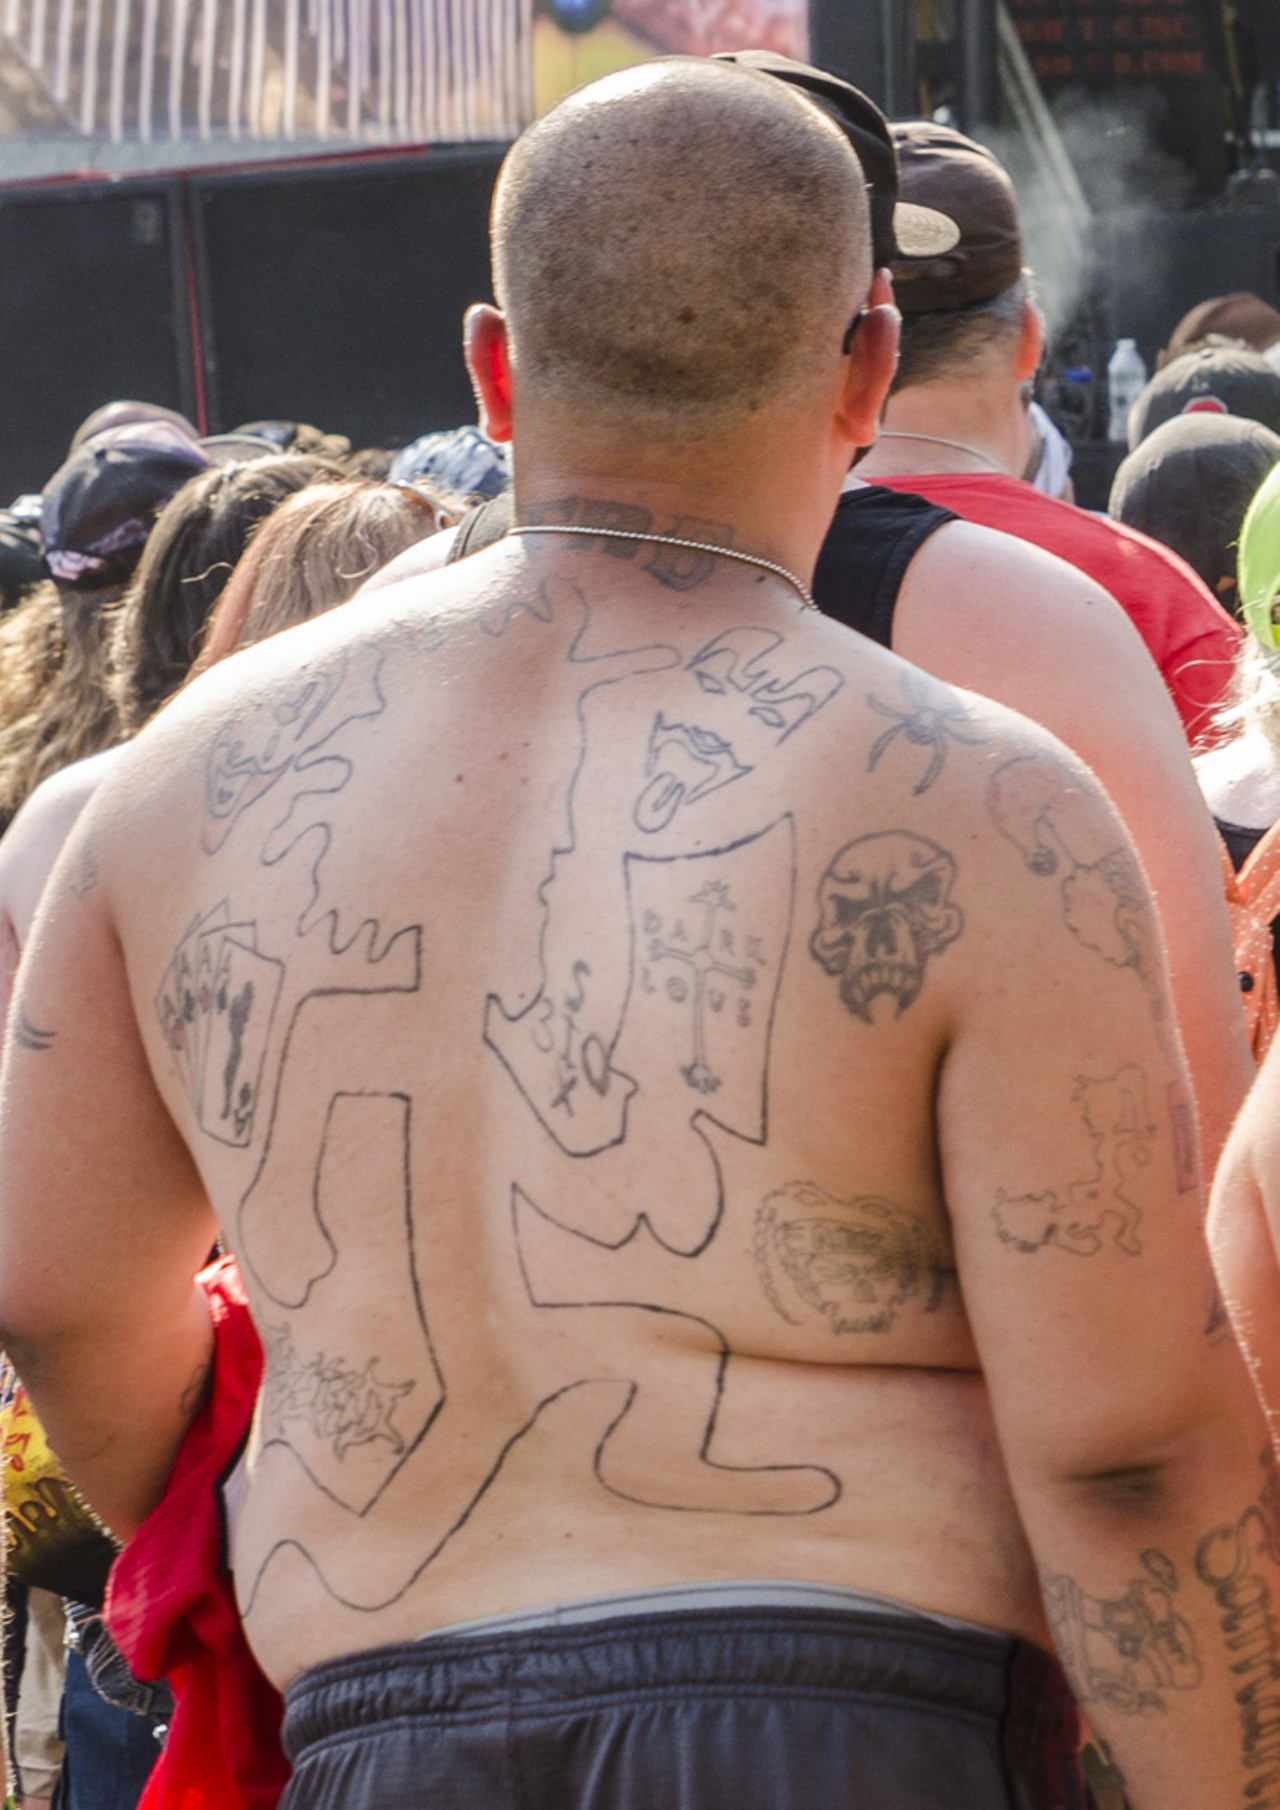 Everything we saw at the Gathering of the Juggalos